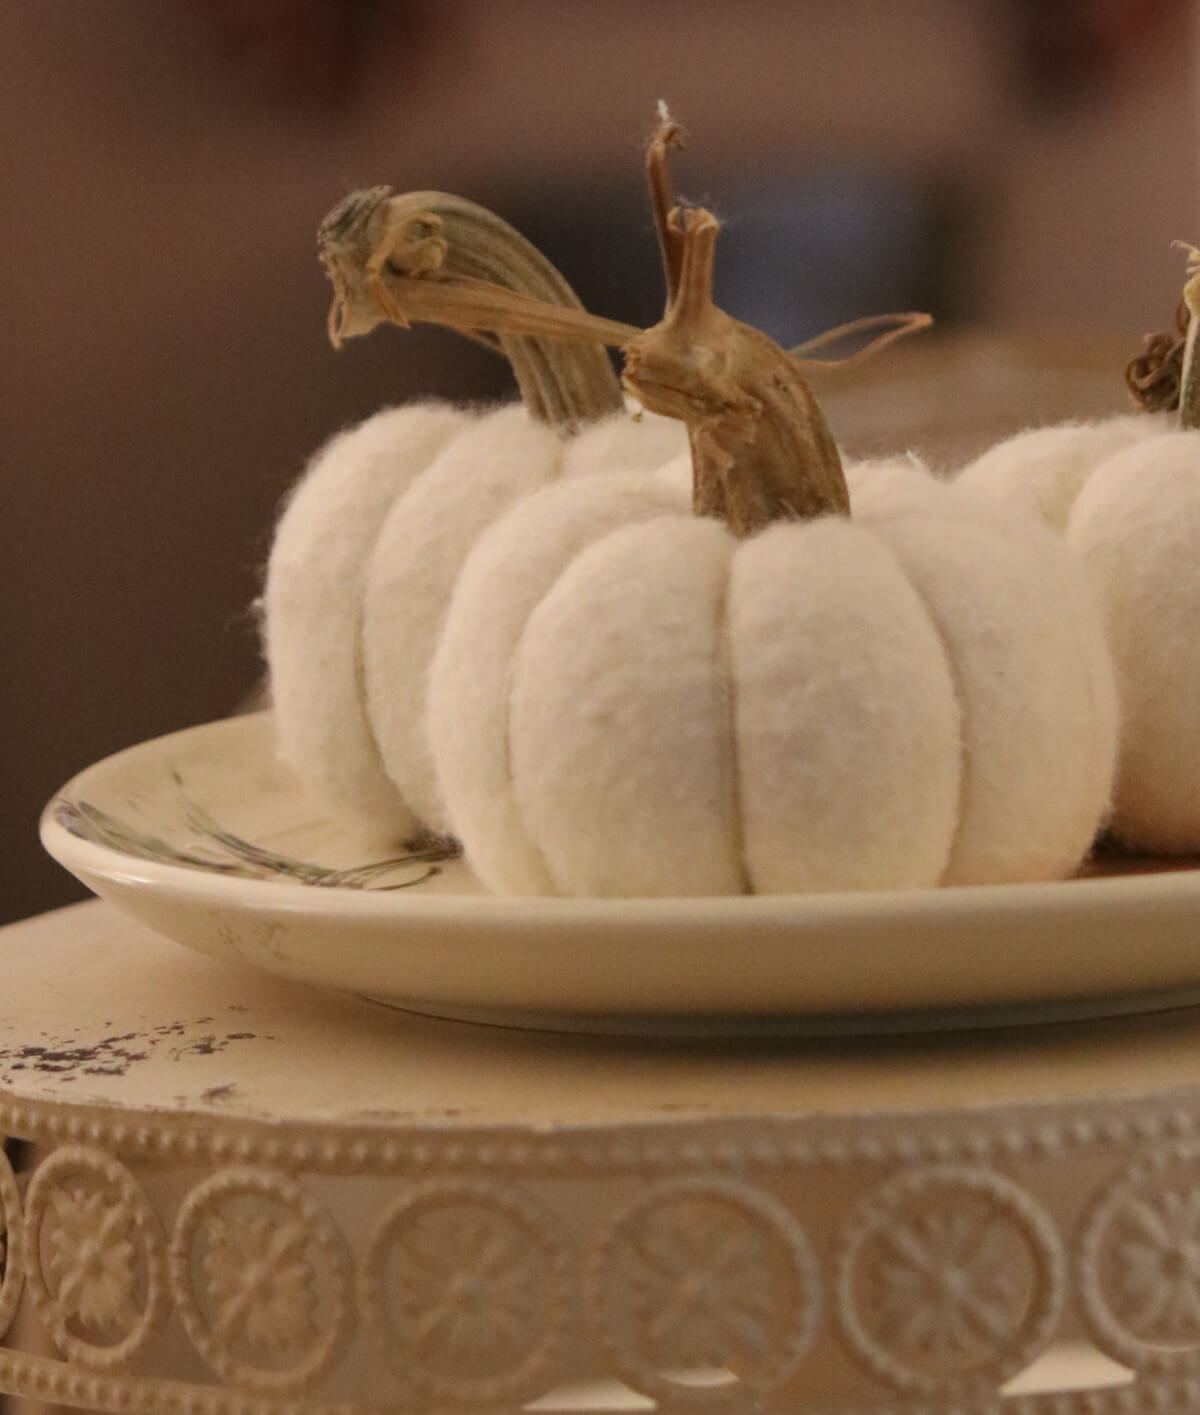 In Cozy Minimalist Fall Decorating, a trio of felt pumpkins on the table